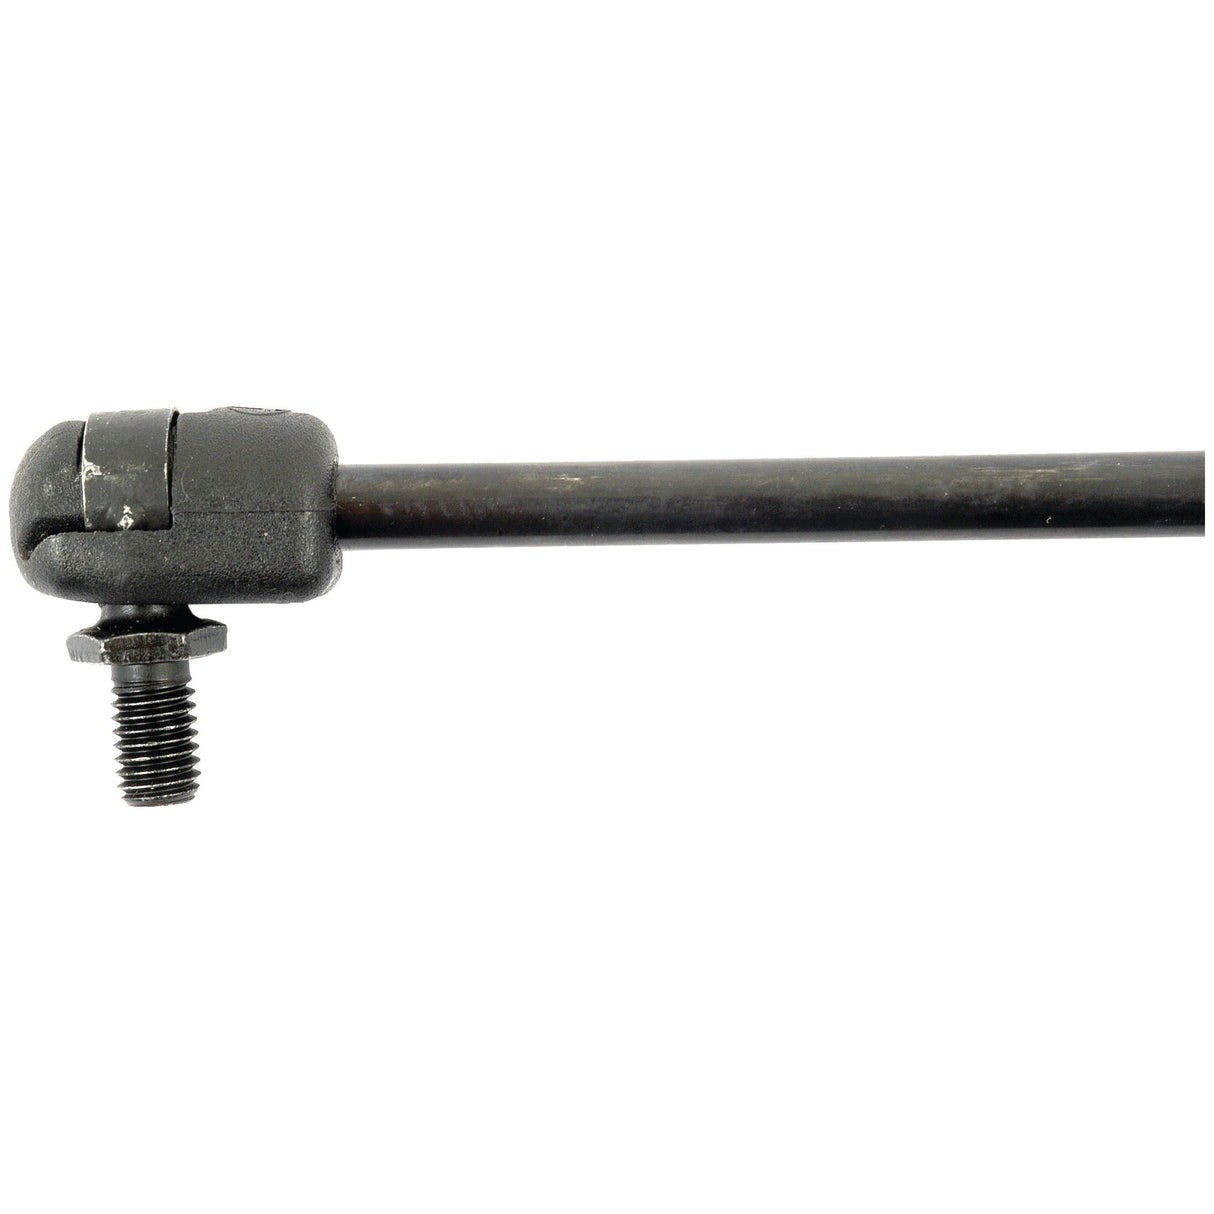 Gas Strut,  Total length: 530mm
 - S.68687 - Massey Tractor Parts